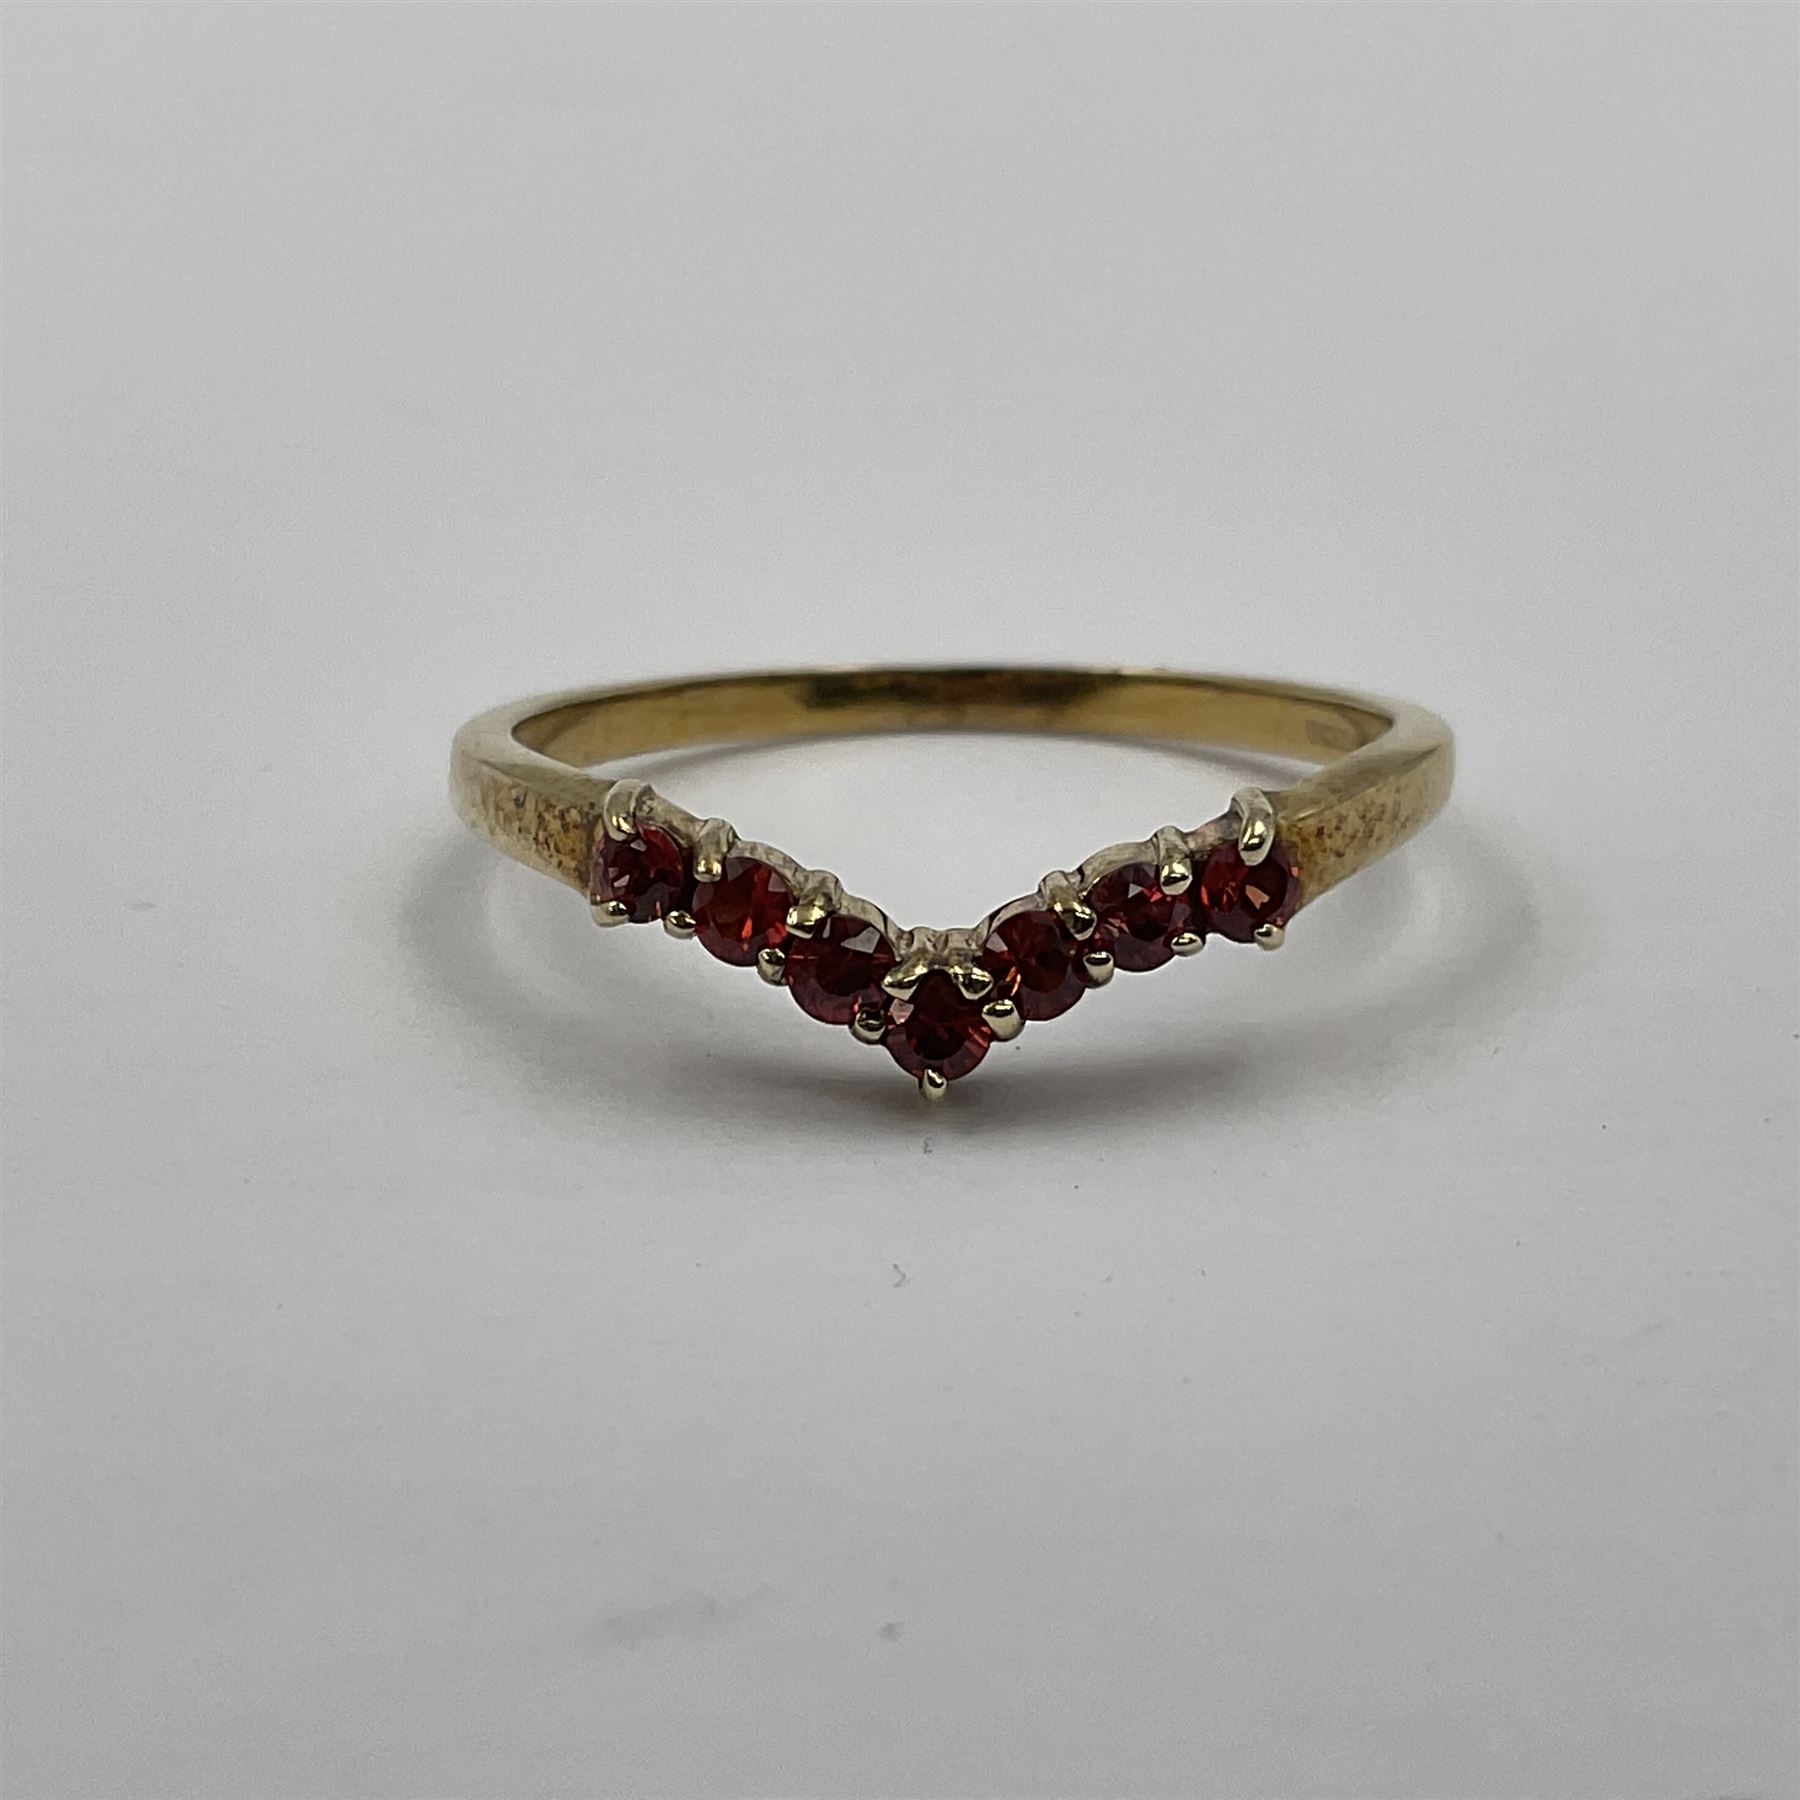 9ct gold seven stone fire opal wishbone ring - Image 3 of 4